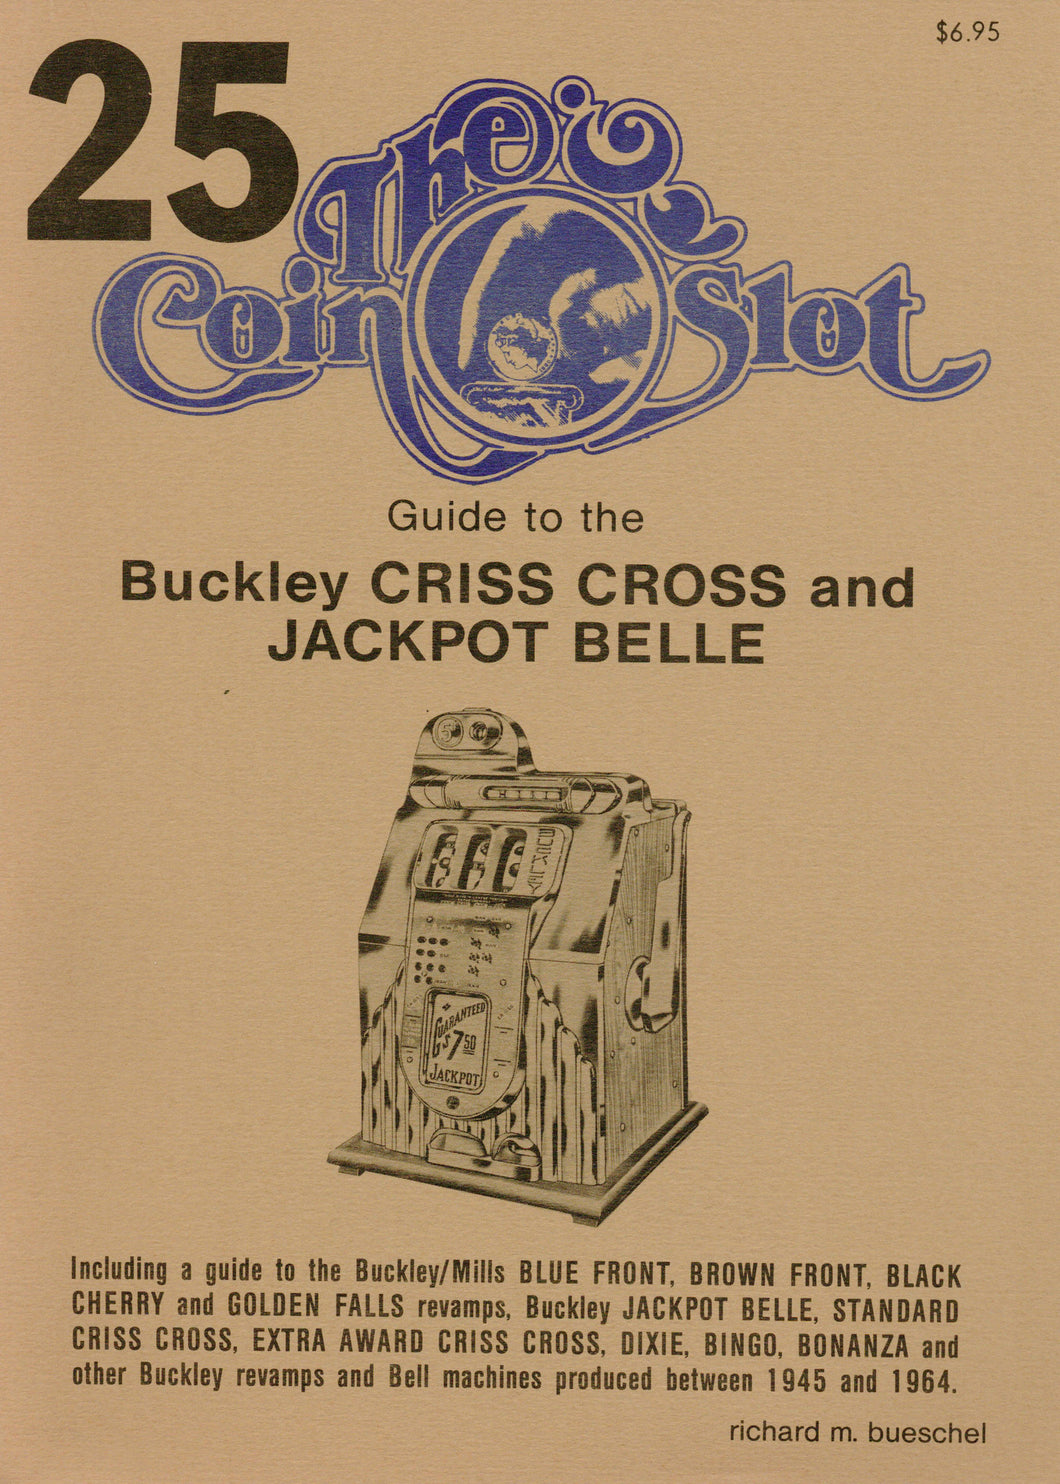 Coin Slot #25. Guide to the Buckley Criss Cross and Jackpot Belle